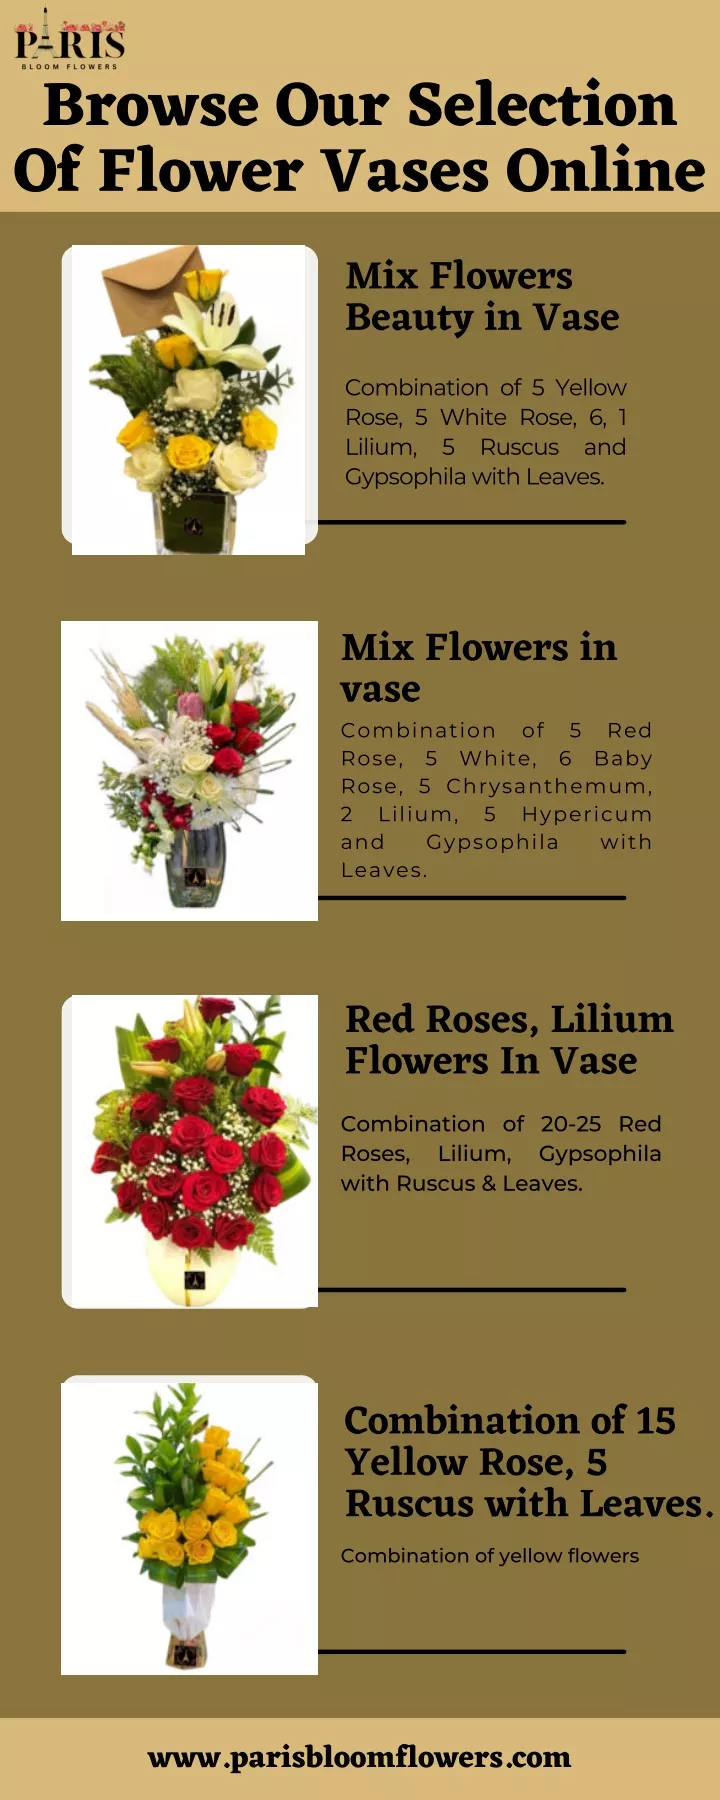 browse our selection of flower vases online